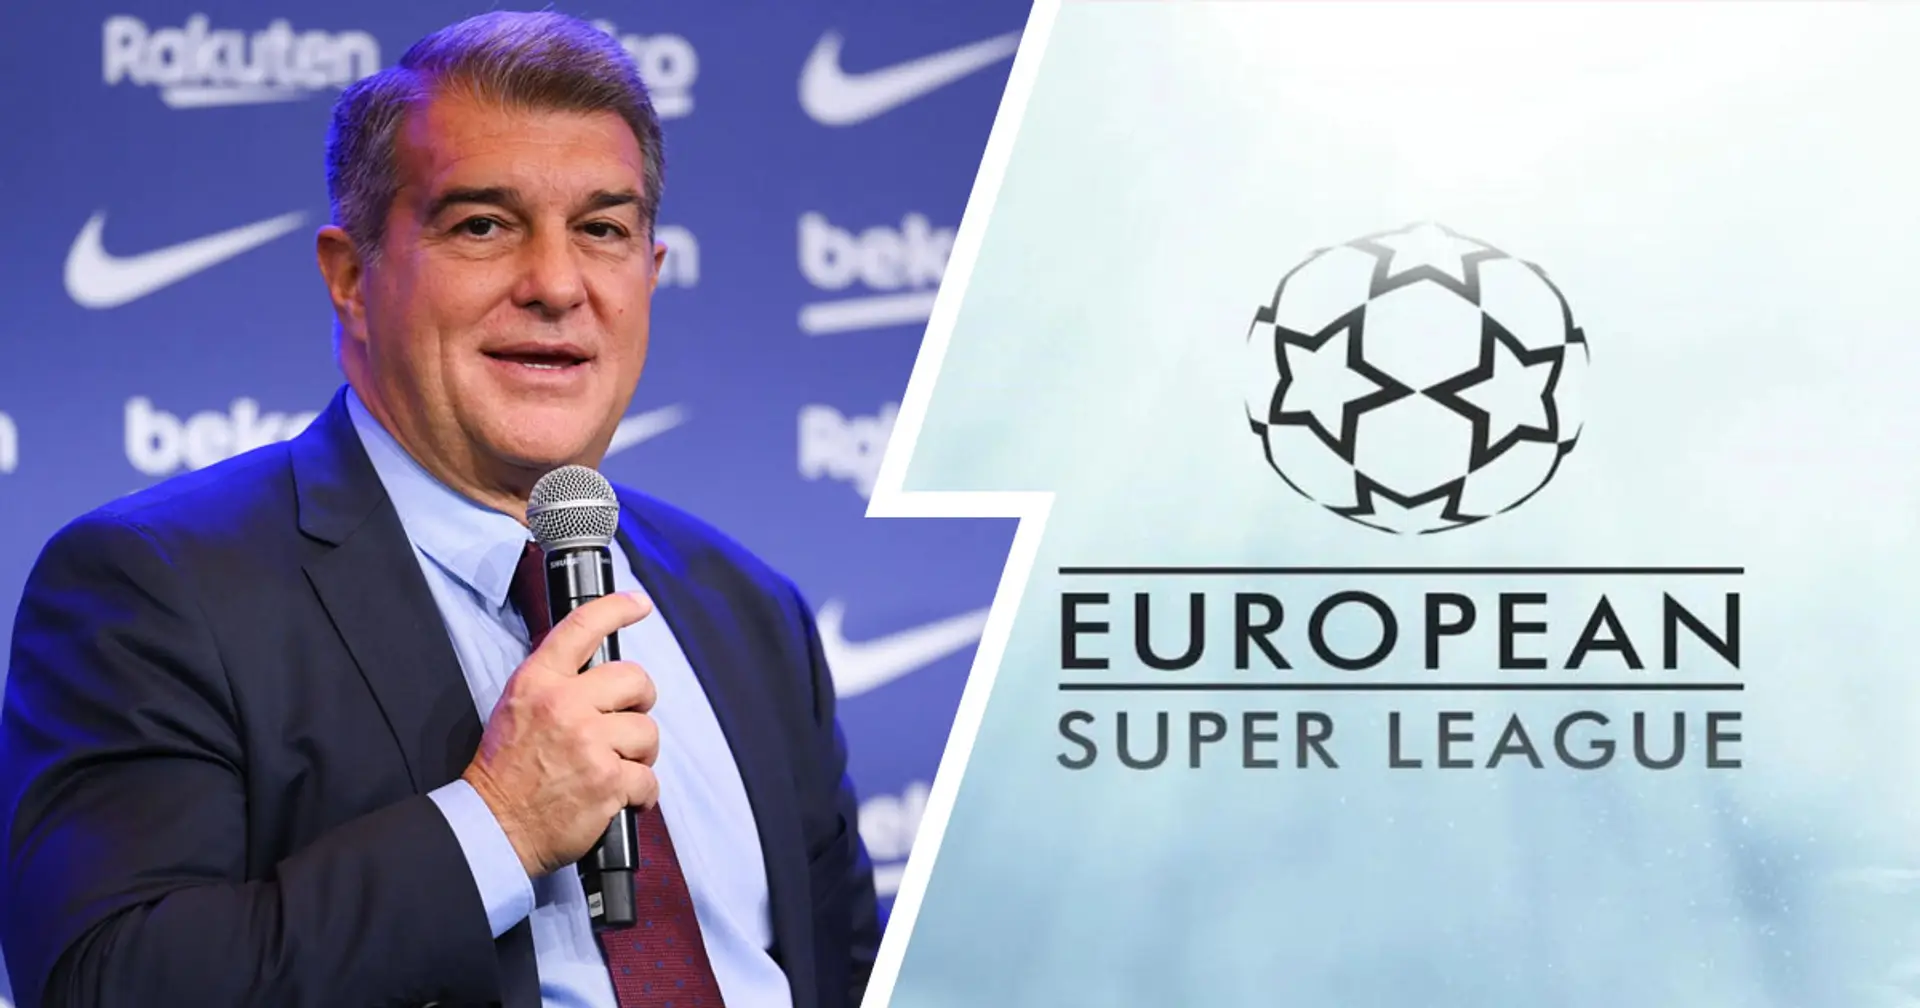 Barca president Laporta: ‘The Super League project is still on. The English clubs want to come back’